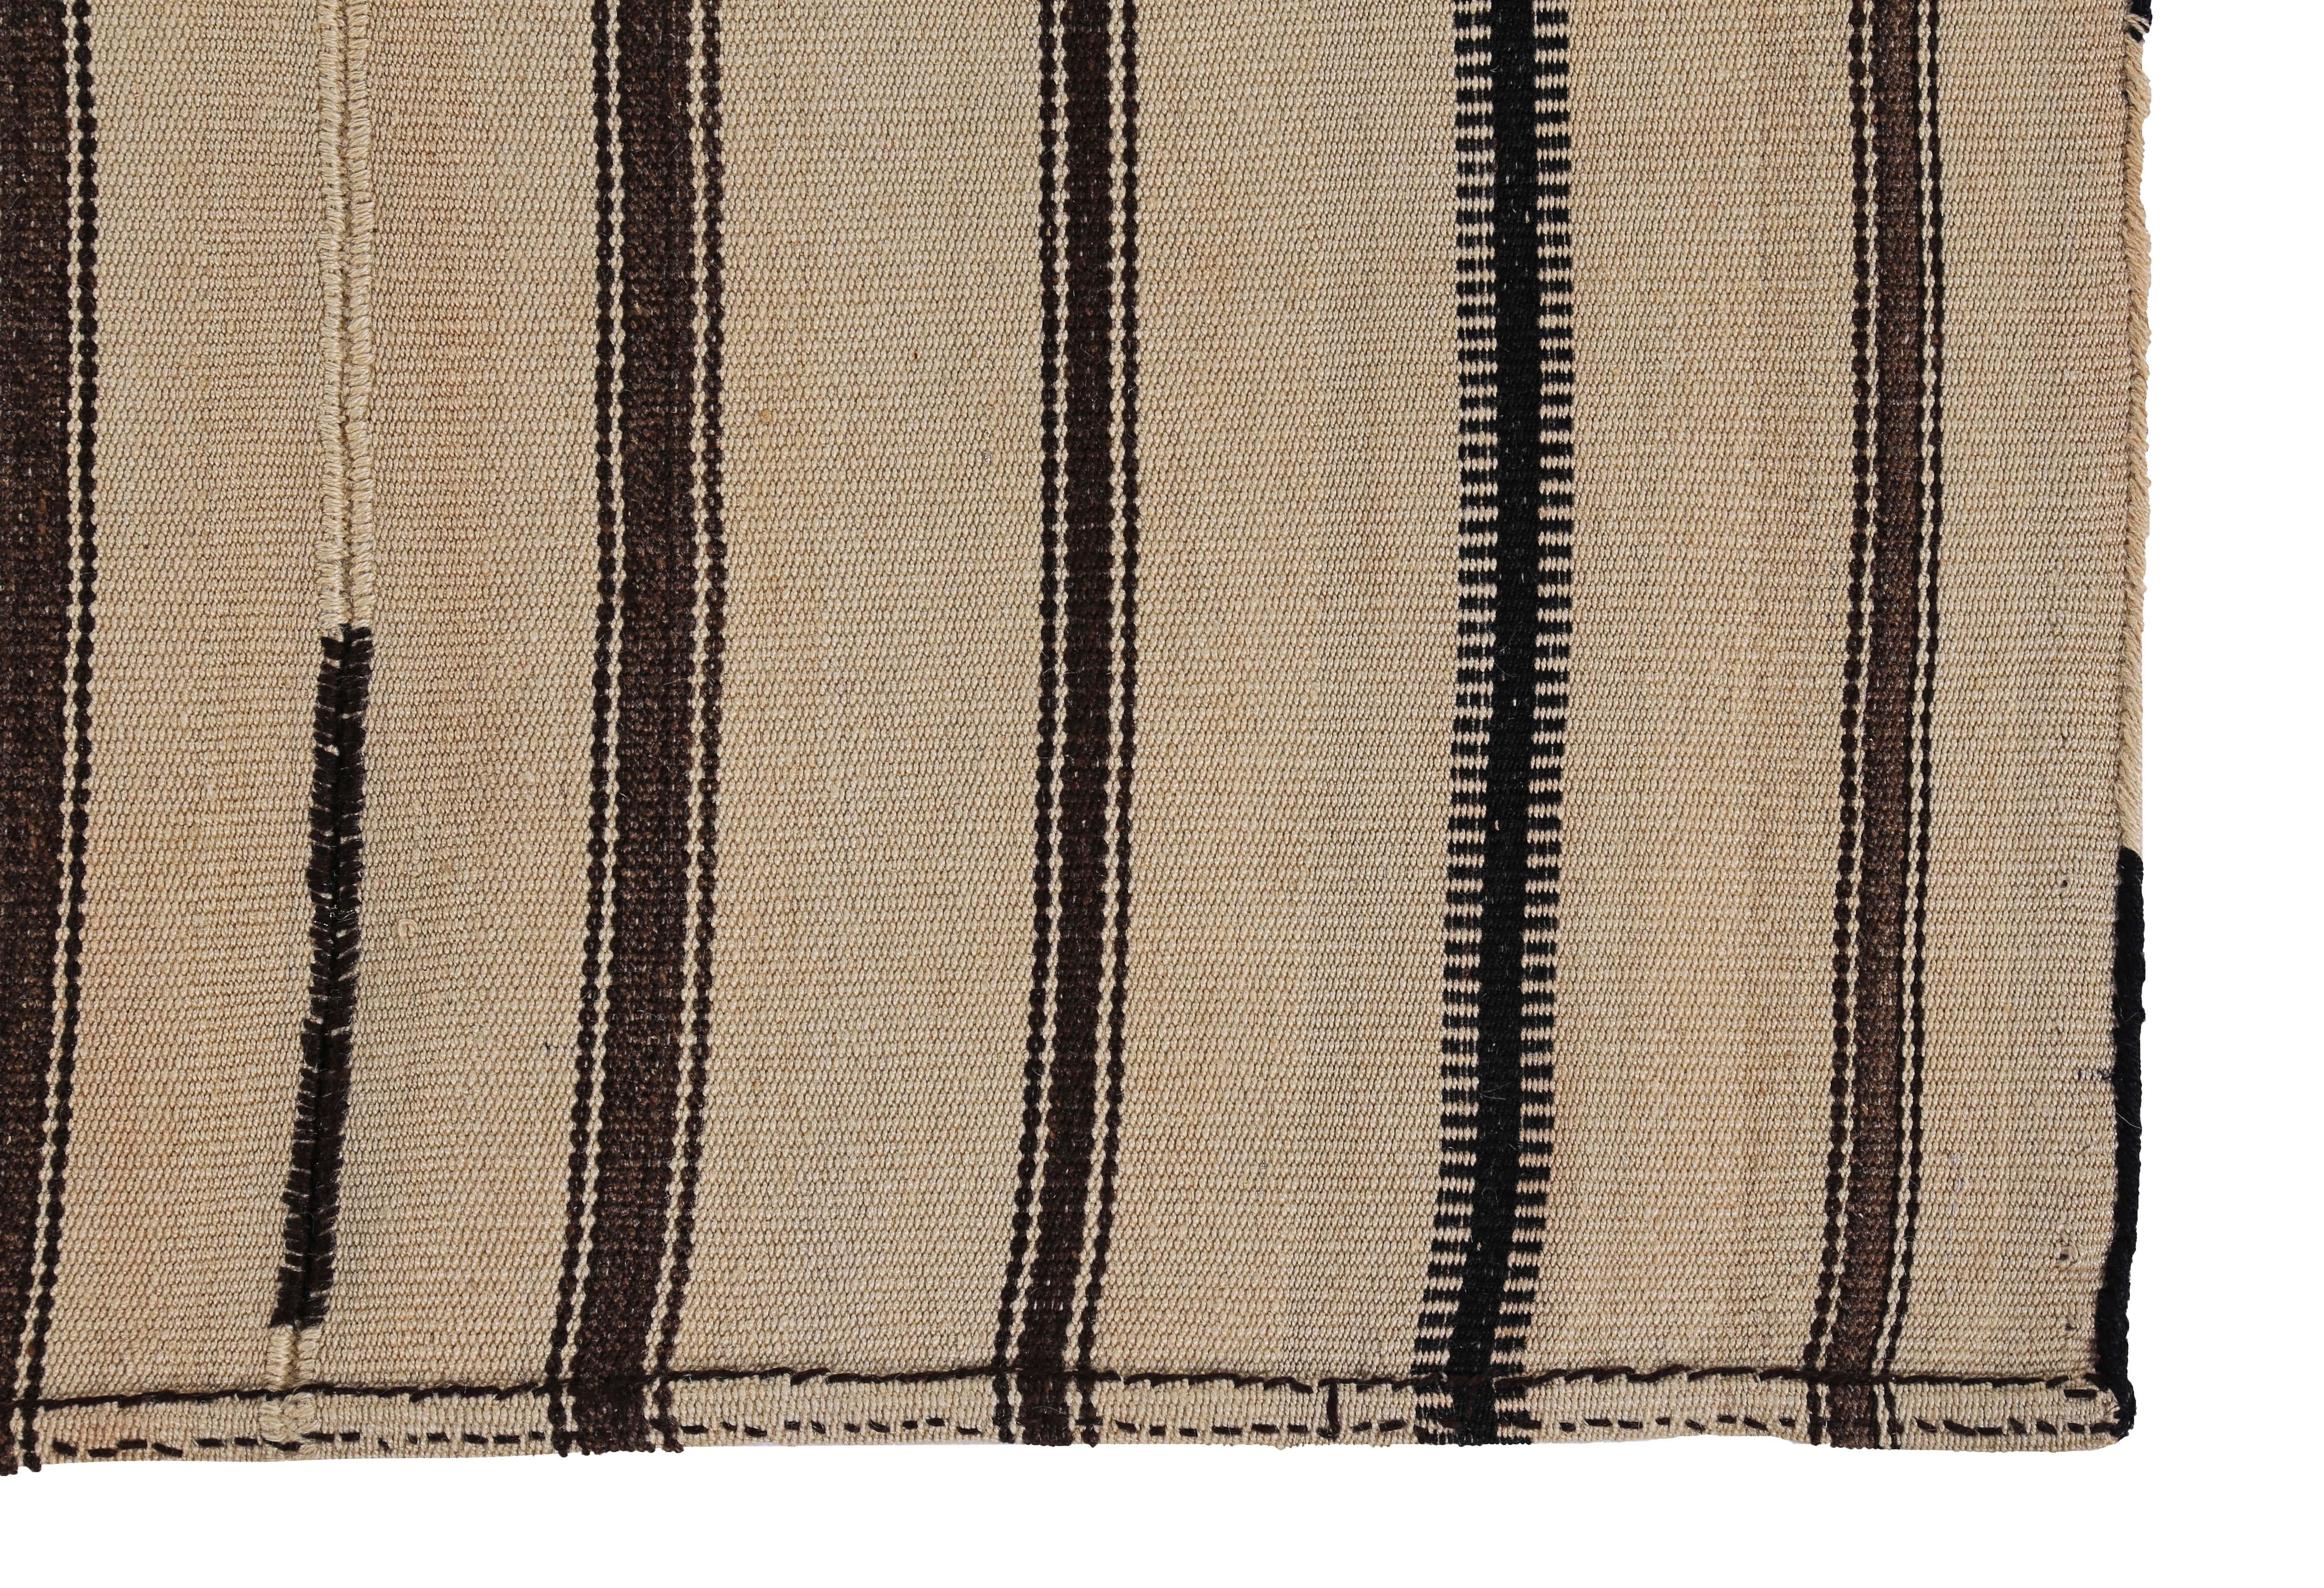 Hand-Woven Modern Turkish Kilim Rug with Black and Brown Pencil Stripes in a Beige Field For Sale